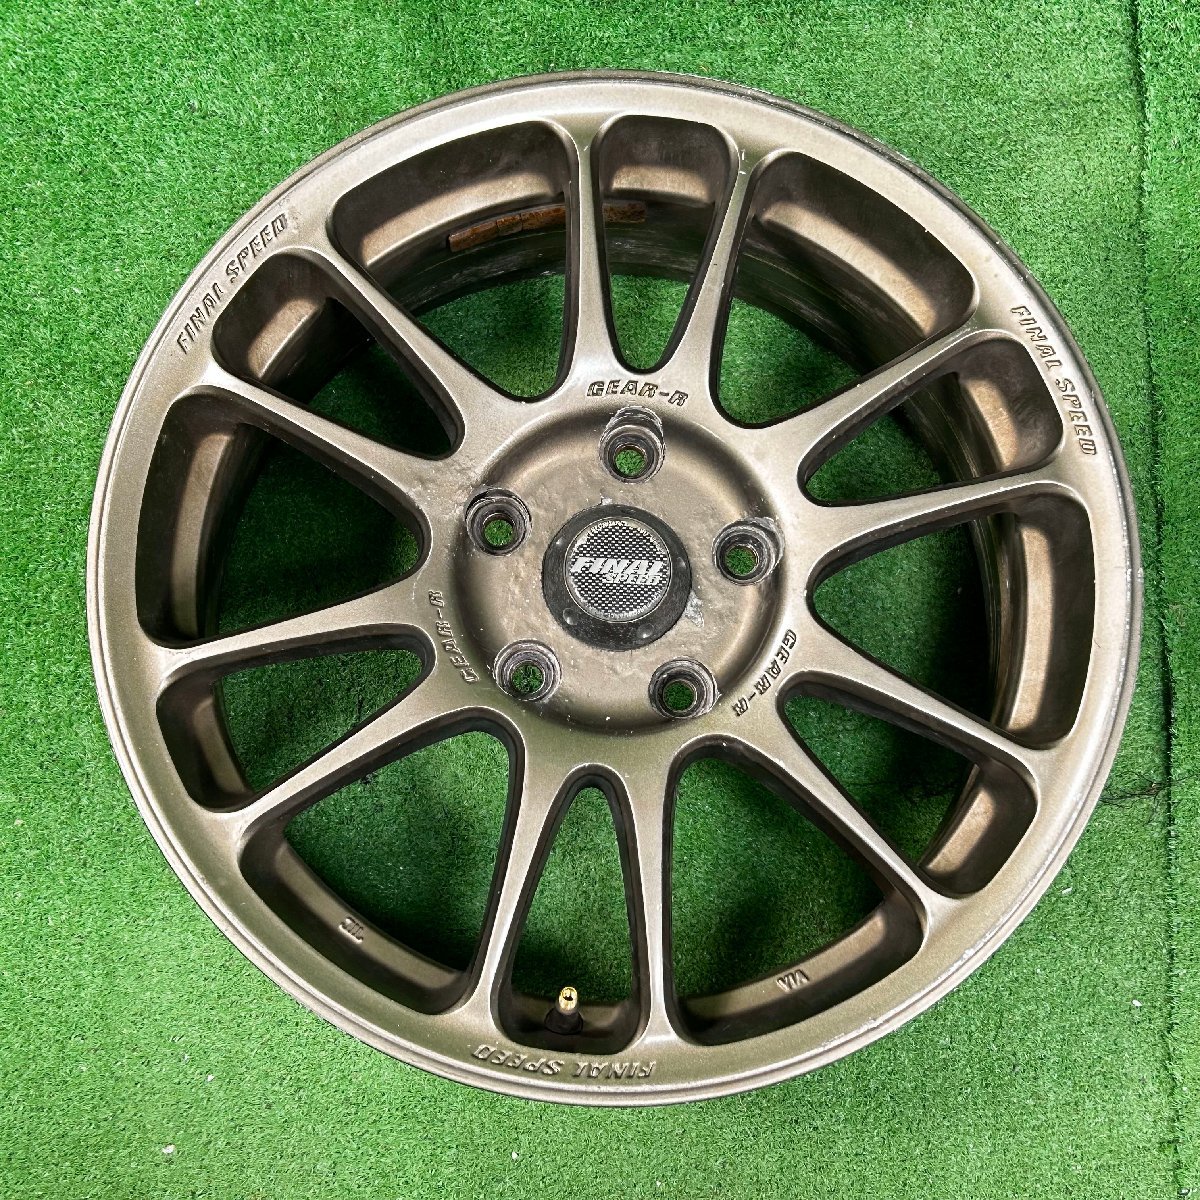 16×7j 5h ＋48 114.3 A-TECH FINAL SPEED GEAR-R エーテック ファイナル アルミ ホイール ホイル 16 インチ in 5穴 pcd 4本 菅16-144の画像2